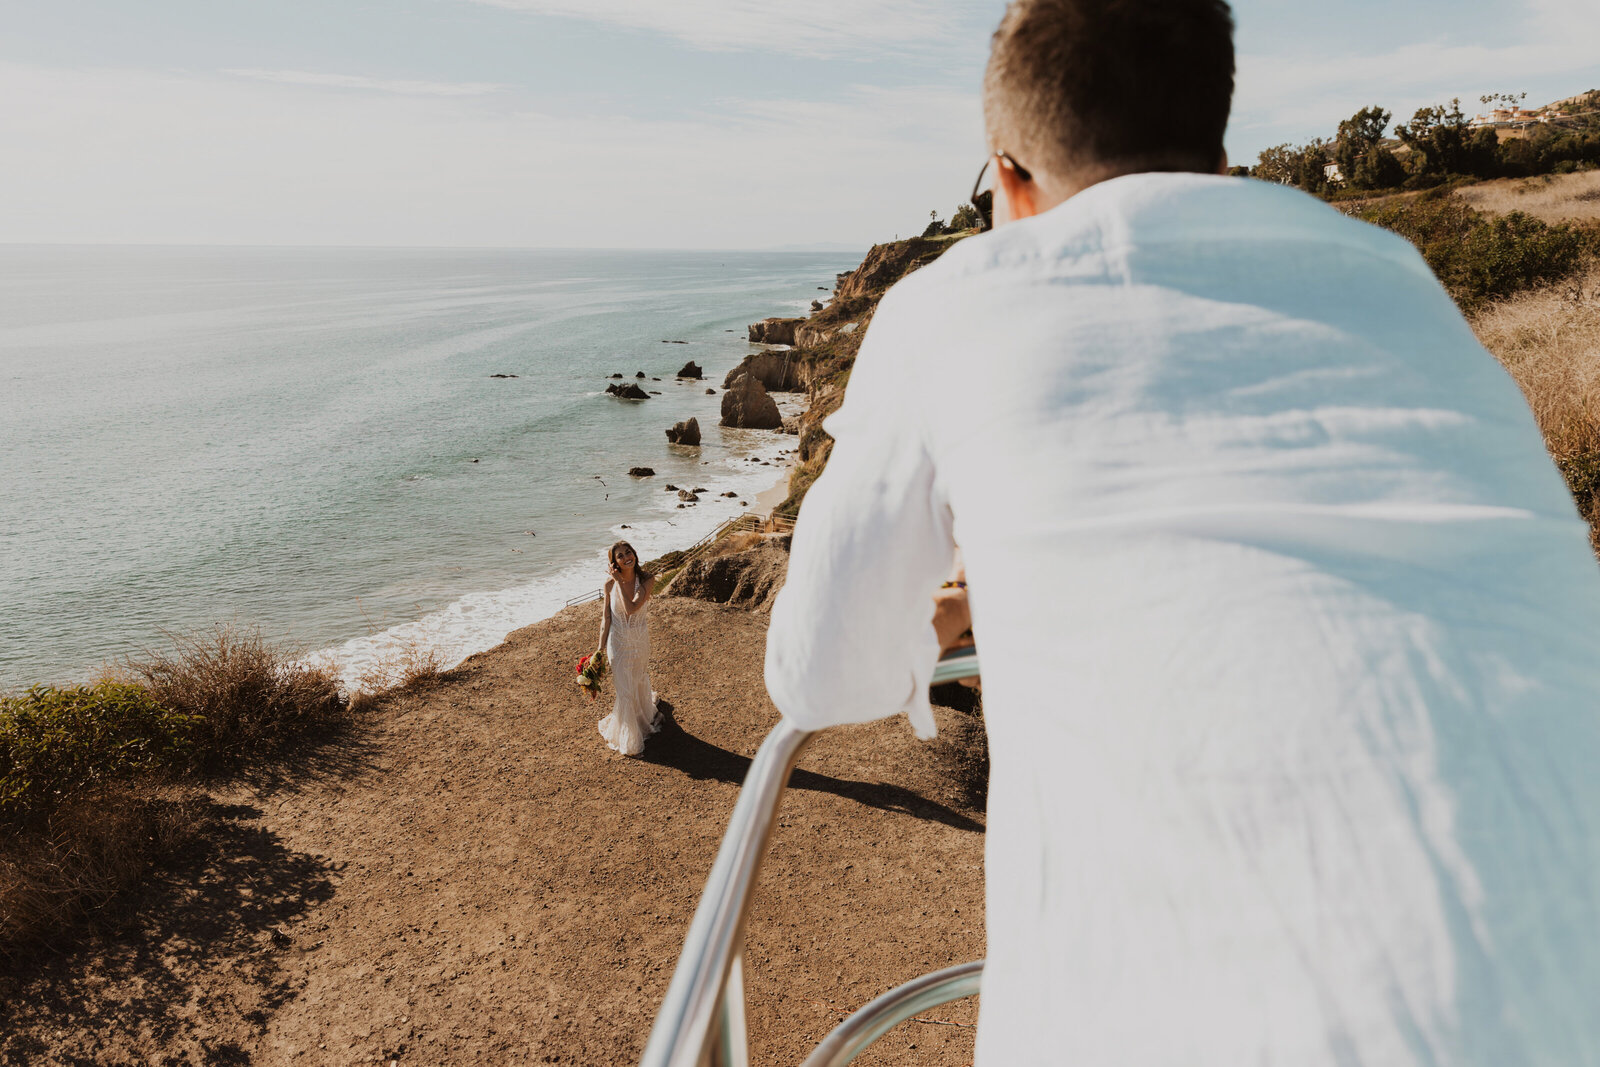 El Matador Beach elopement: An unforgettable adventure for free-spirited couples. Raw emotion and epic scenery in vibrant color